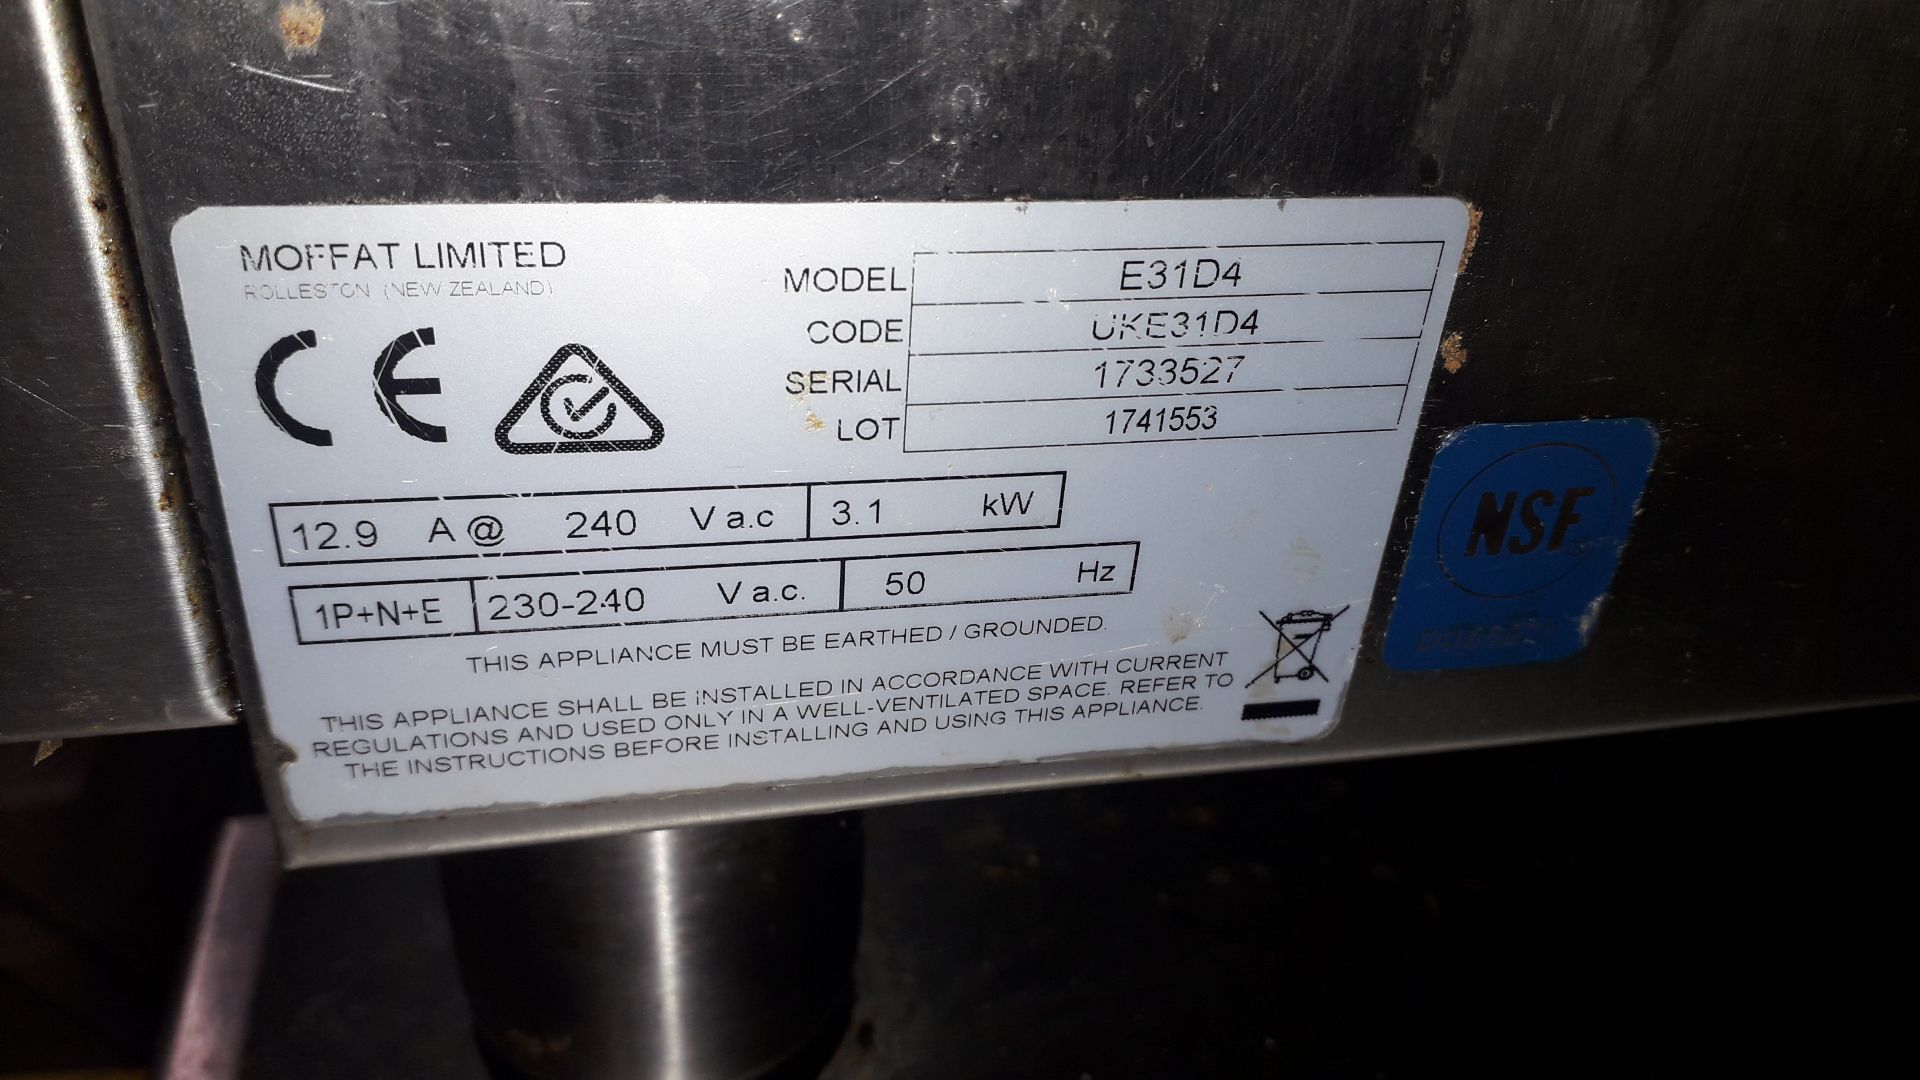 Blue Seal Turbofan E31D4 Convection Oven Serial Number 1733527 240v on Stainless Steel Stand, - Image 4 of 4